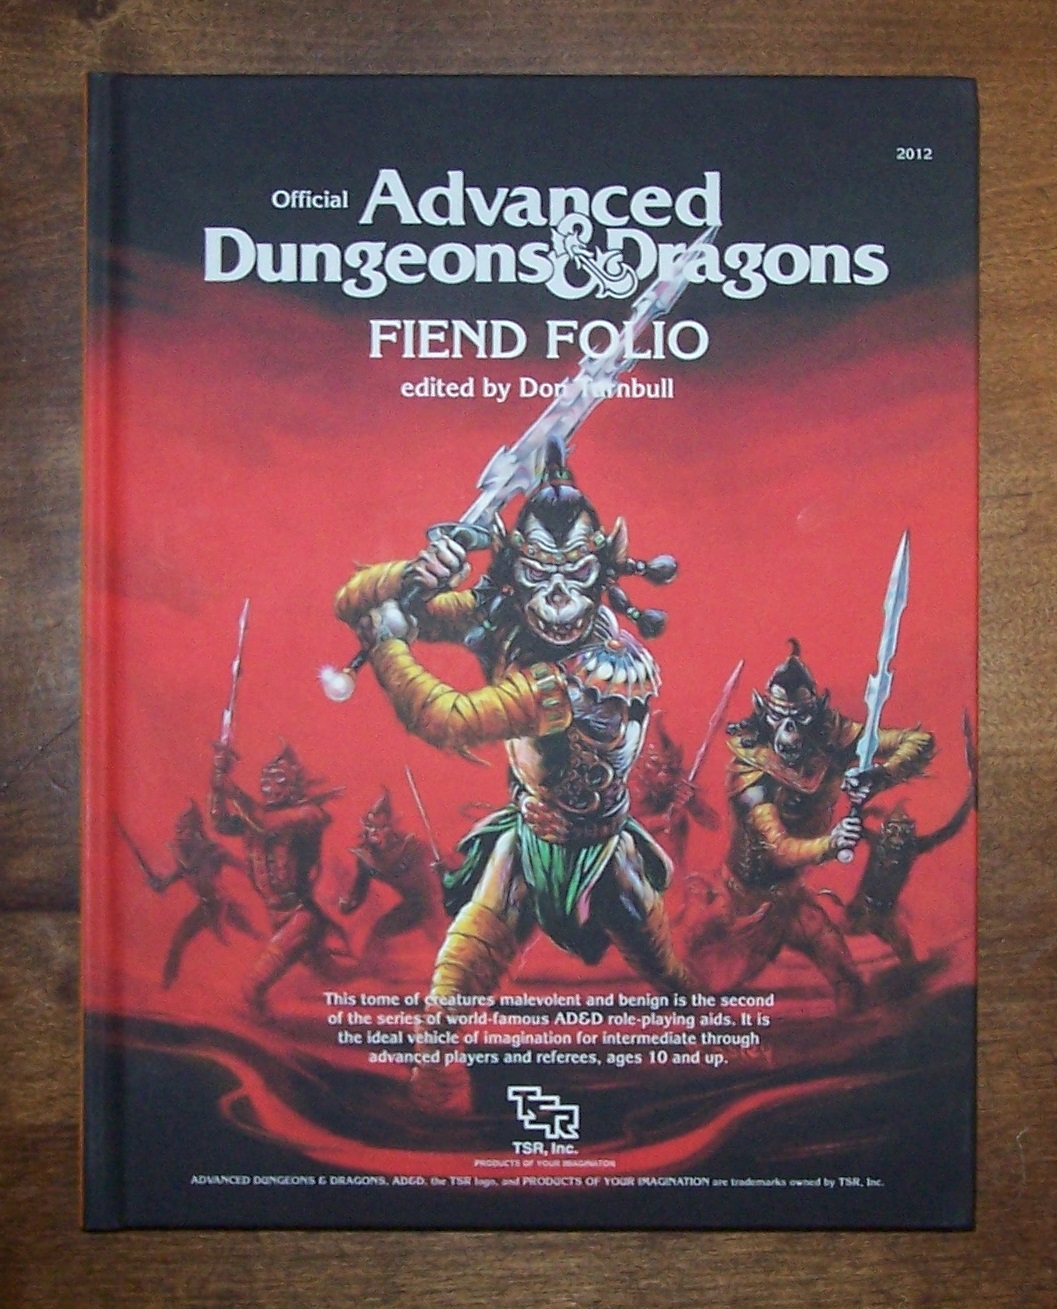 FF cover front.JPG